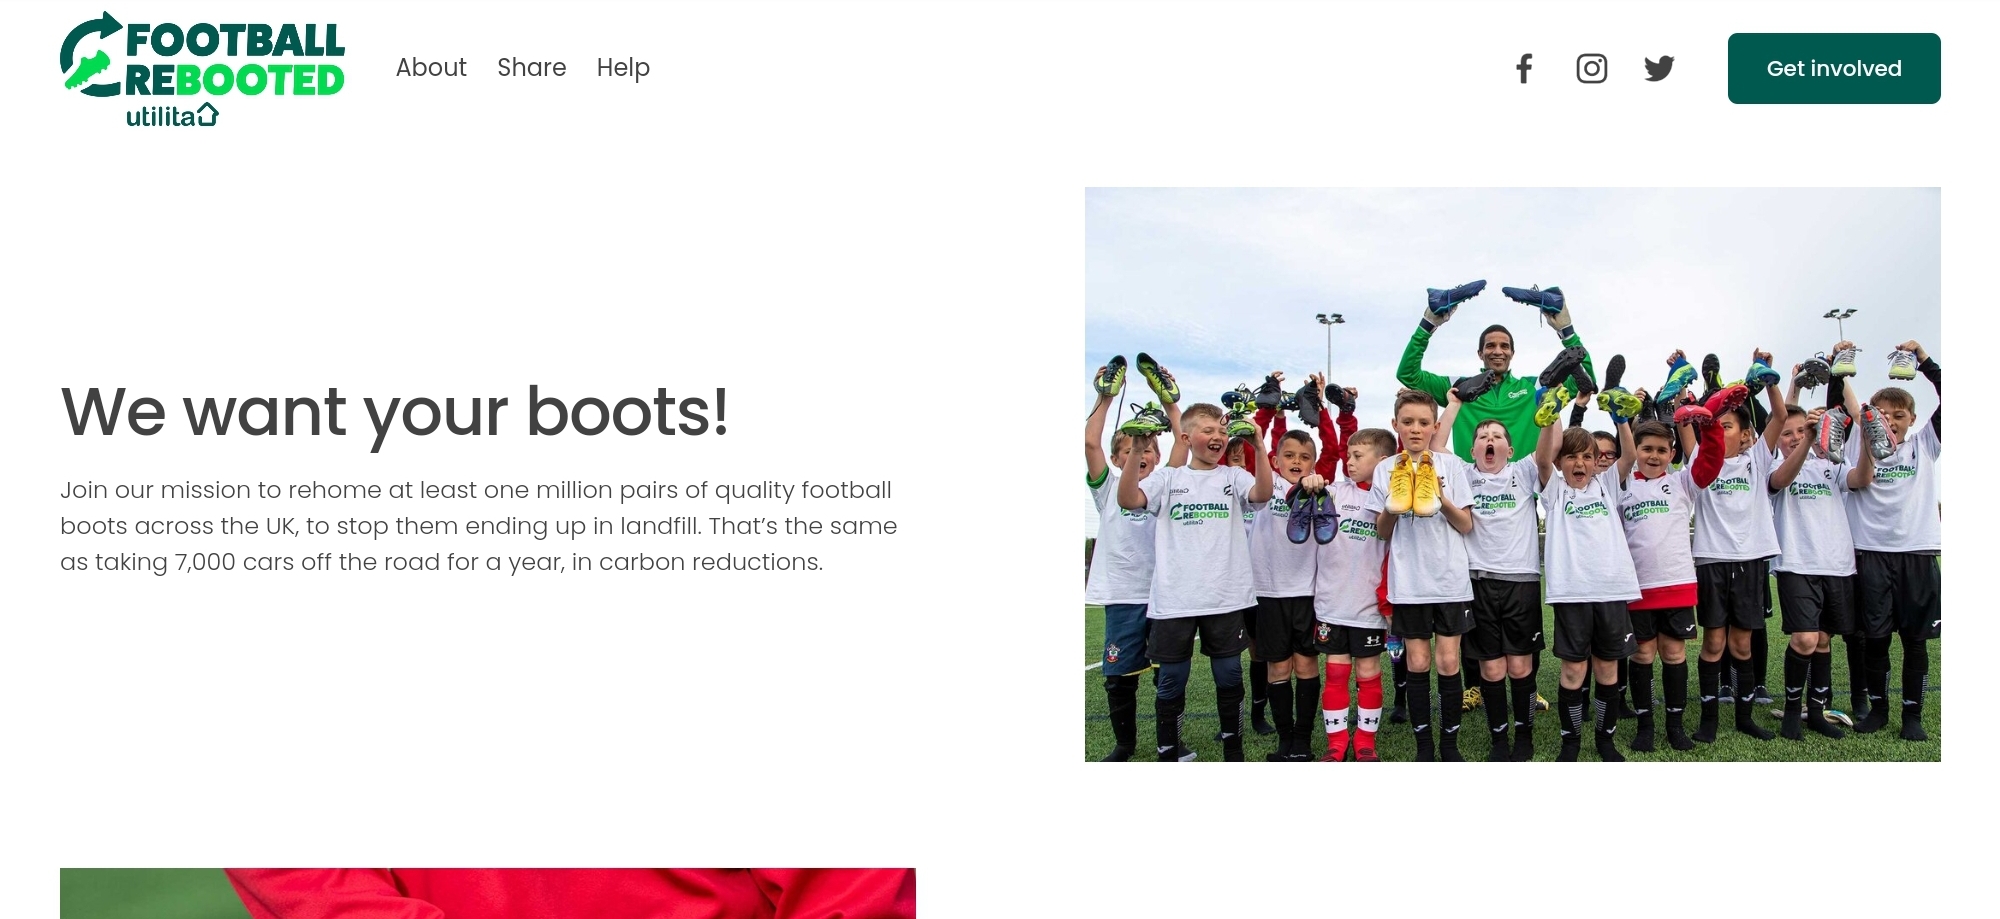 Donating football boots with Football Rebooted